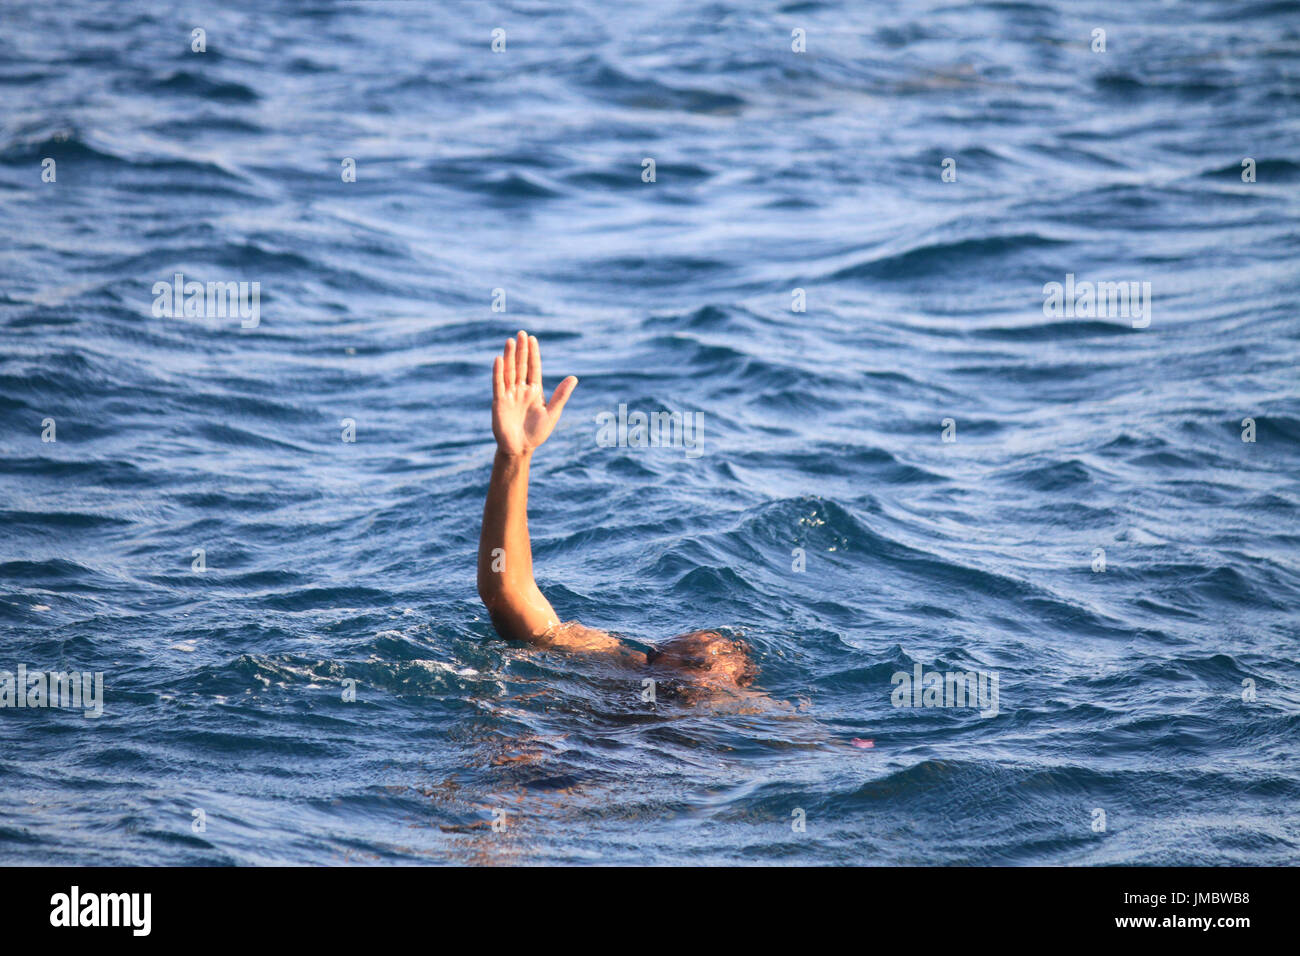 The man drowning in the sea, extending a The man drowning in the sea, extending a helping hand Stock Photo